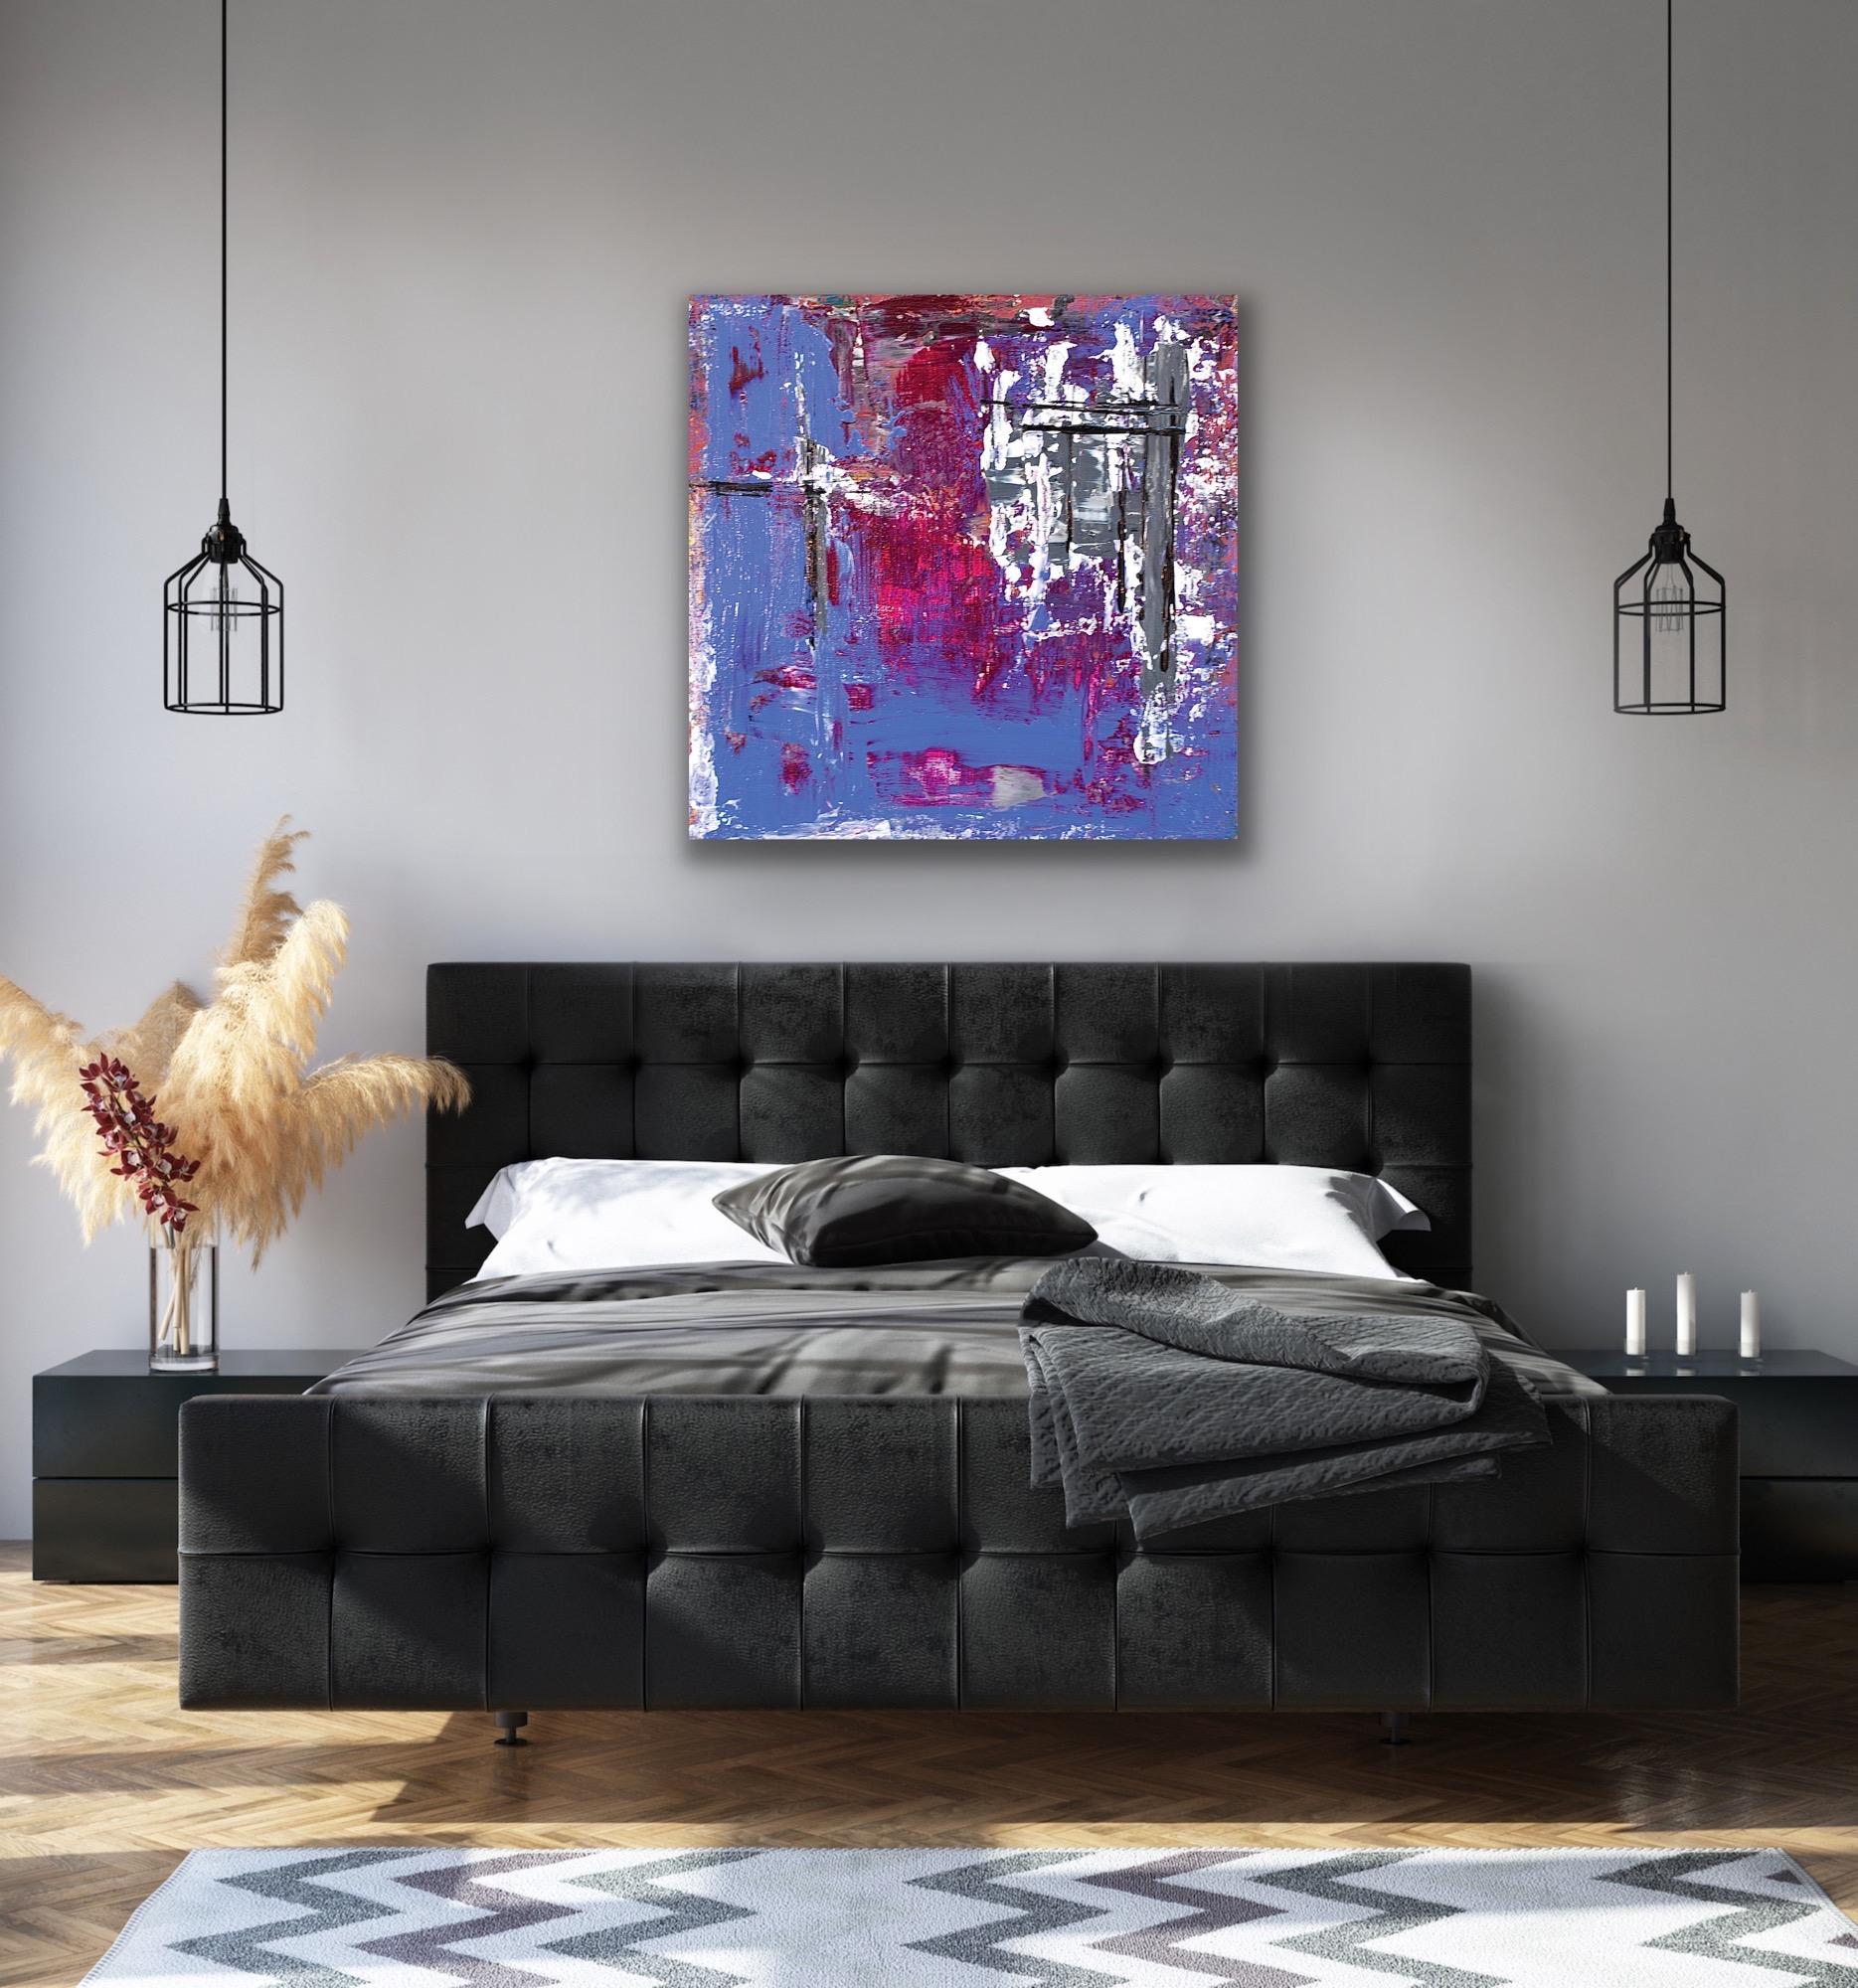 Abstract Painting, Modern Wall Art, Large Indoor Outdoor Decor, Print on Metal 1